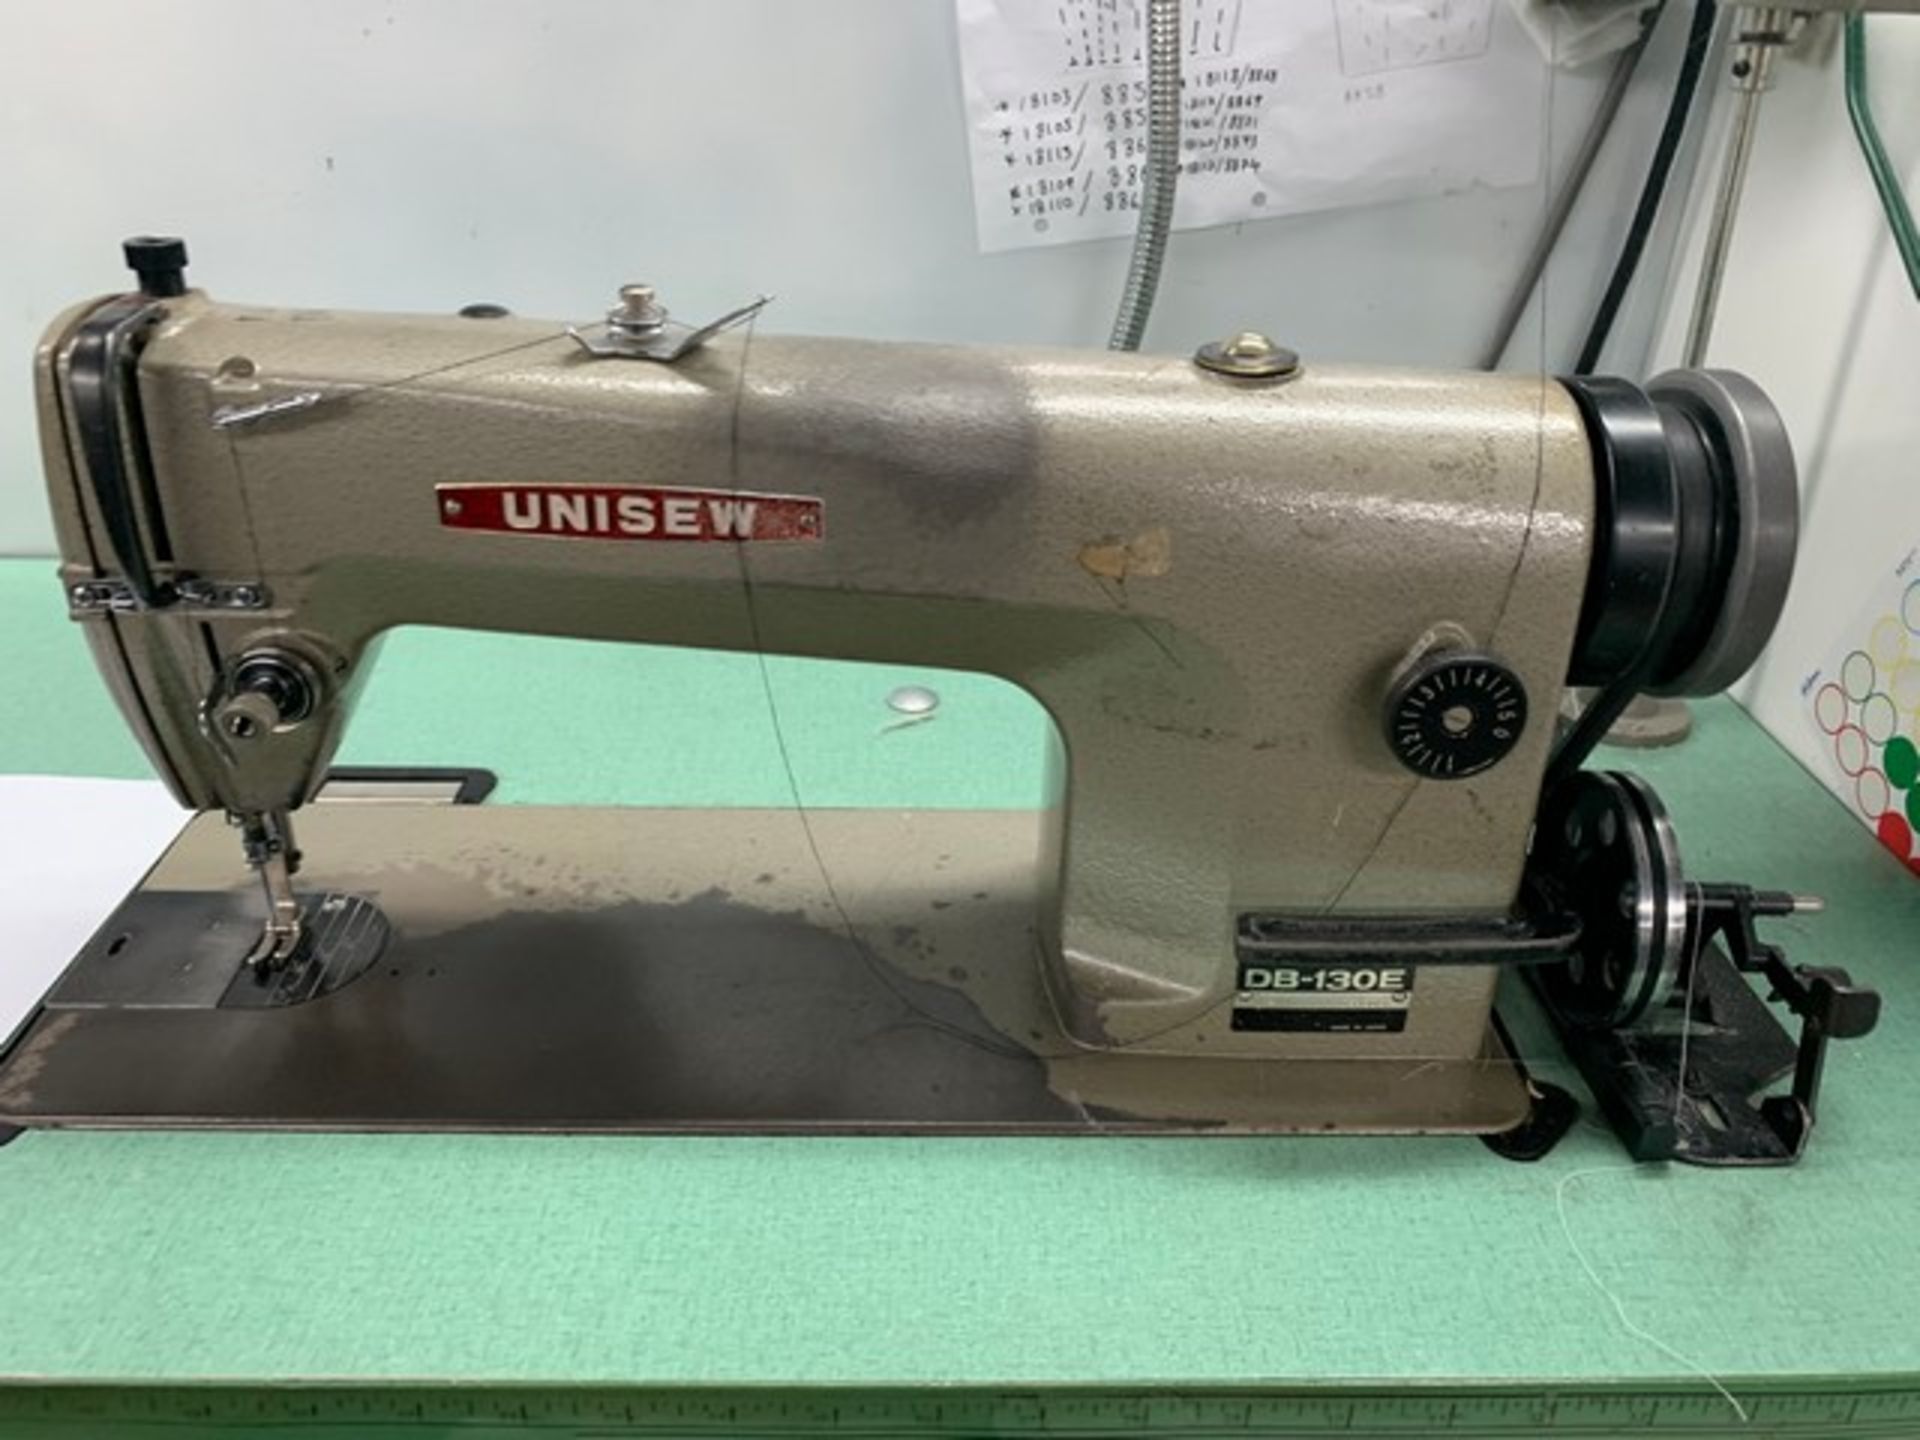 UNISEW DB-130E SEWING MACHINE WITH MOTOR, STAND & LIGHT - Image 2 of 2